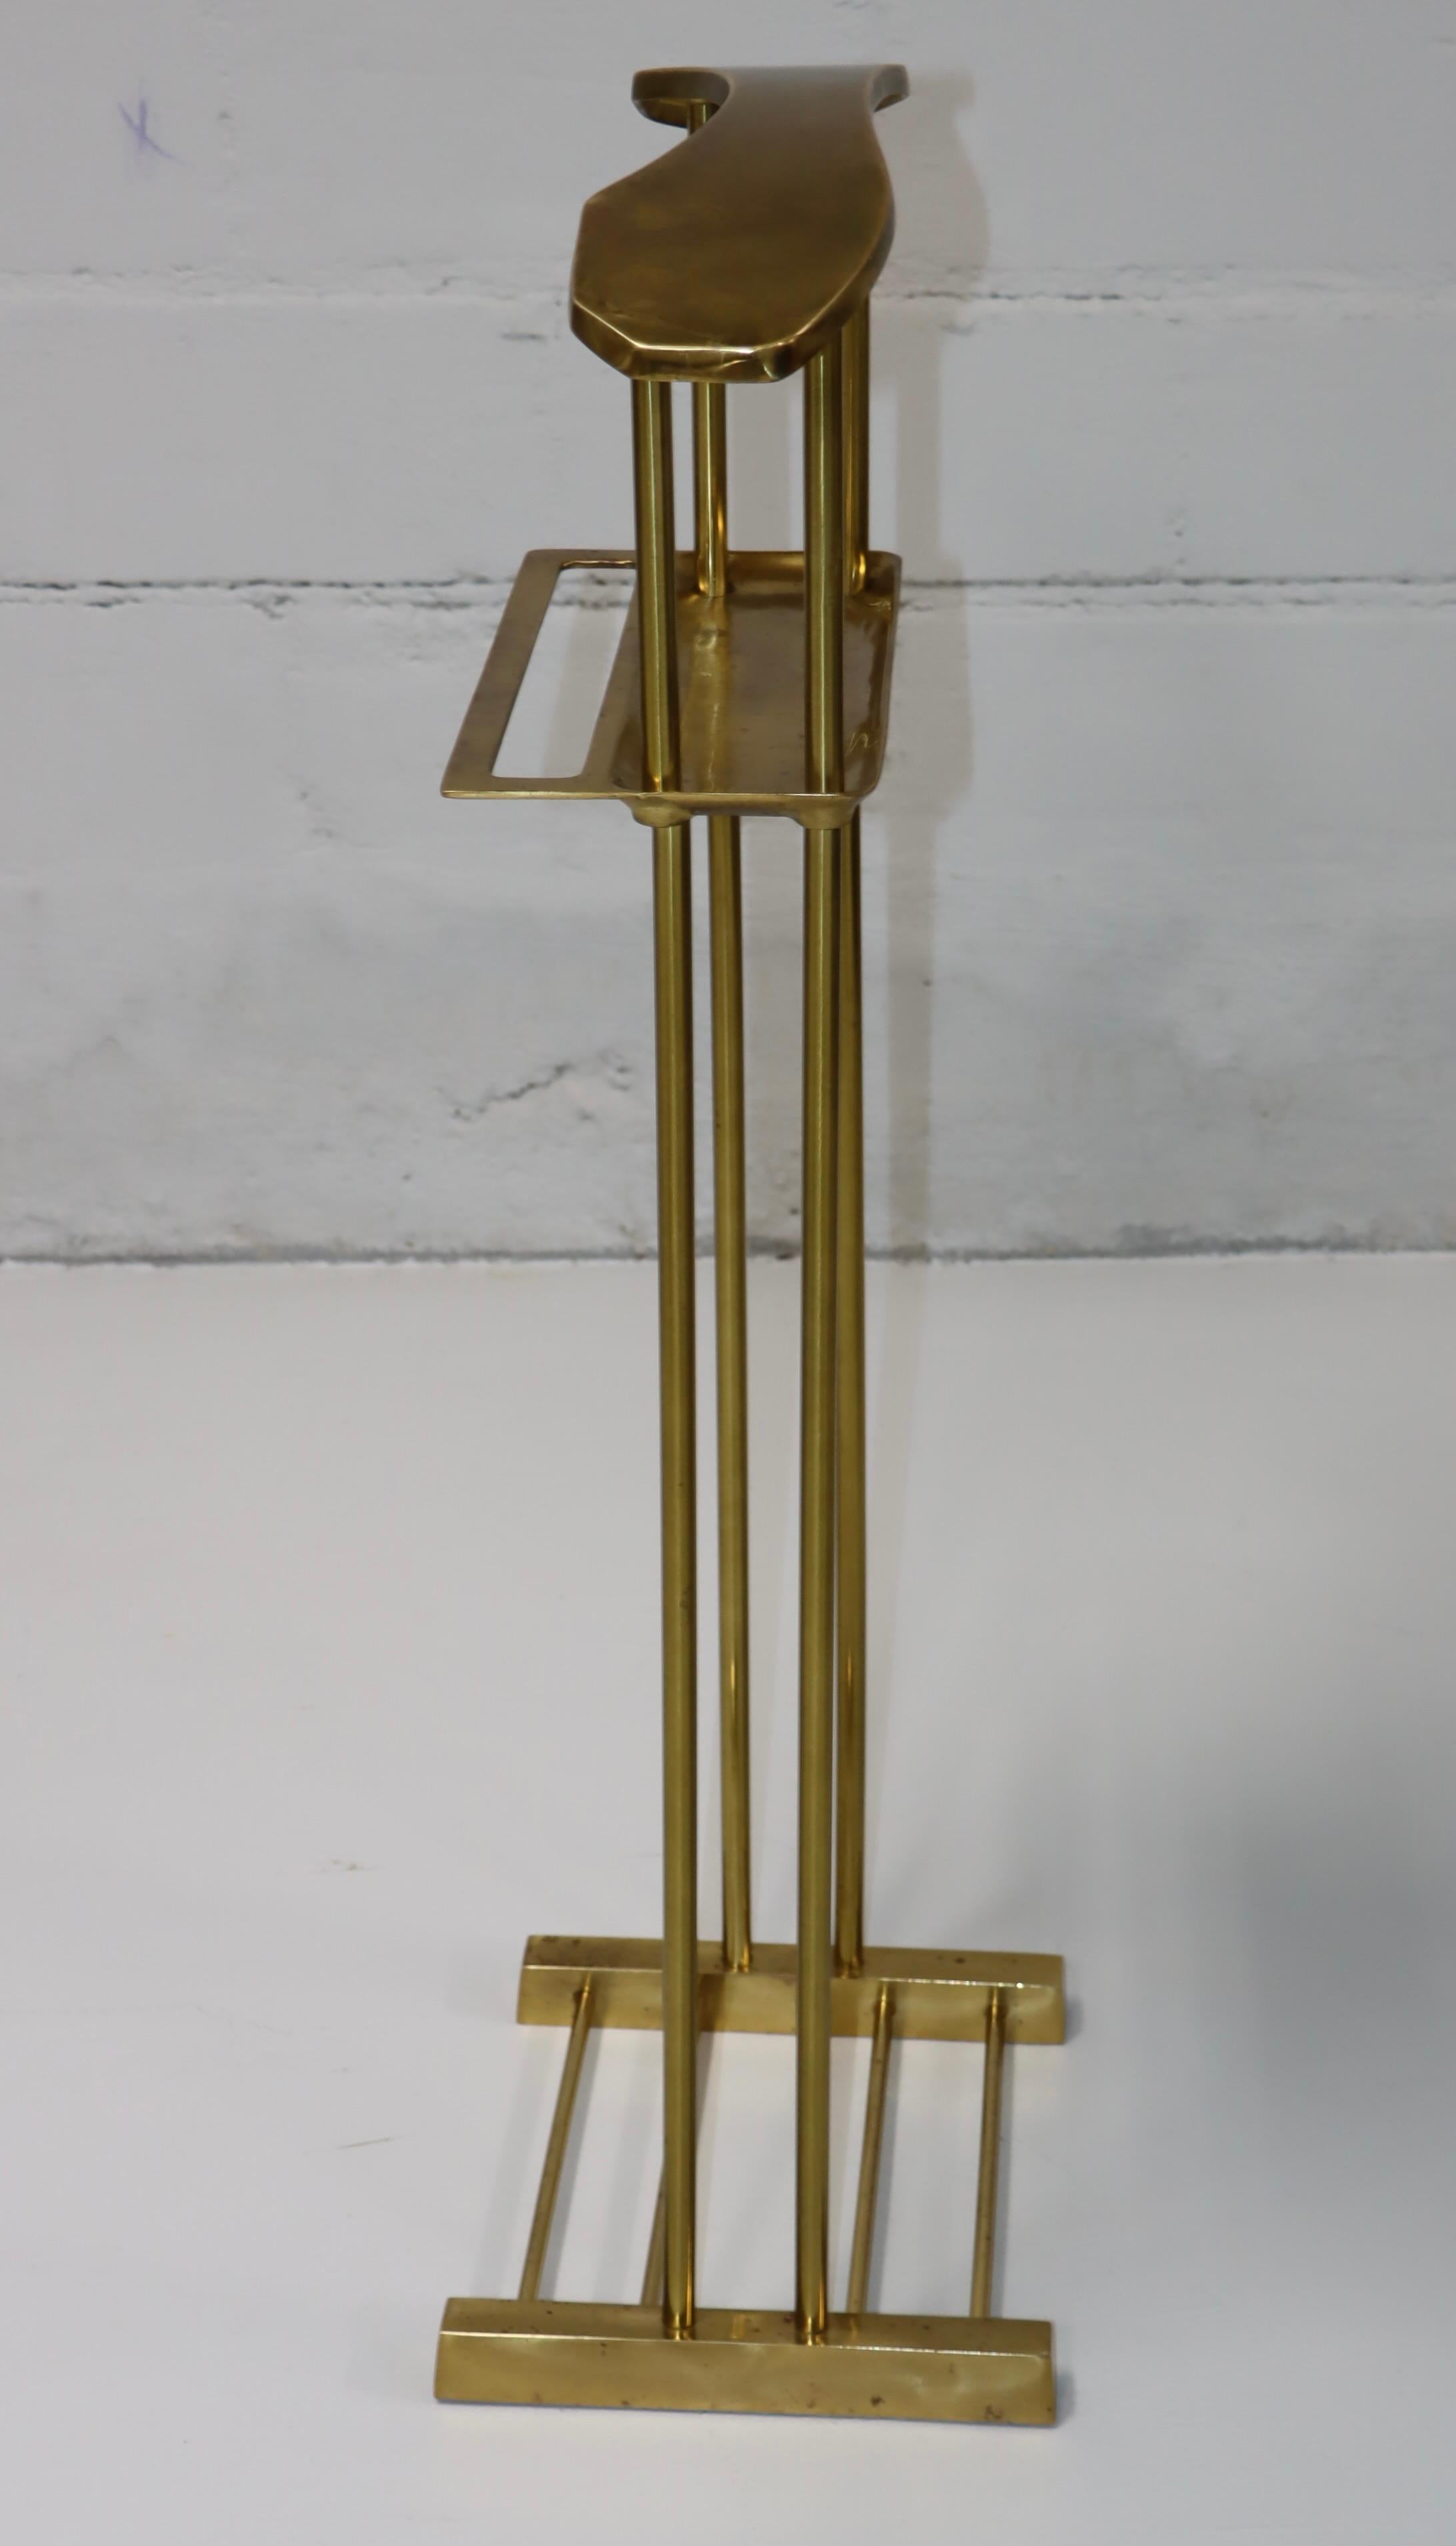 1980's Modernist Brass Valet Stand By Decorative Crafts Inc. In Good Condition For Sale In New York, NY